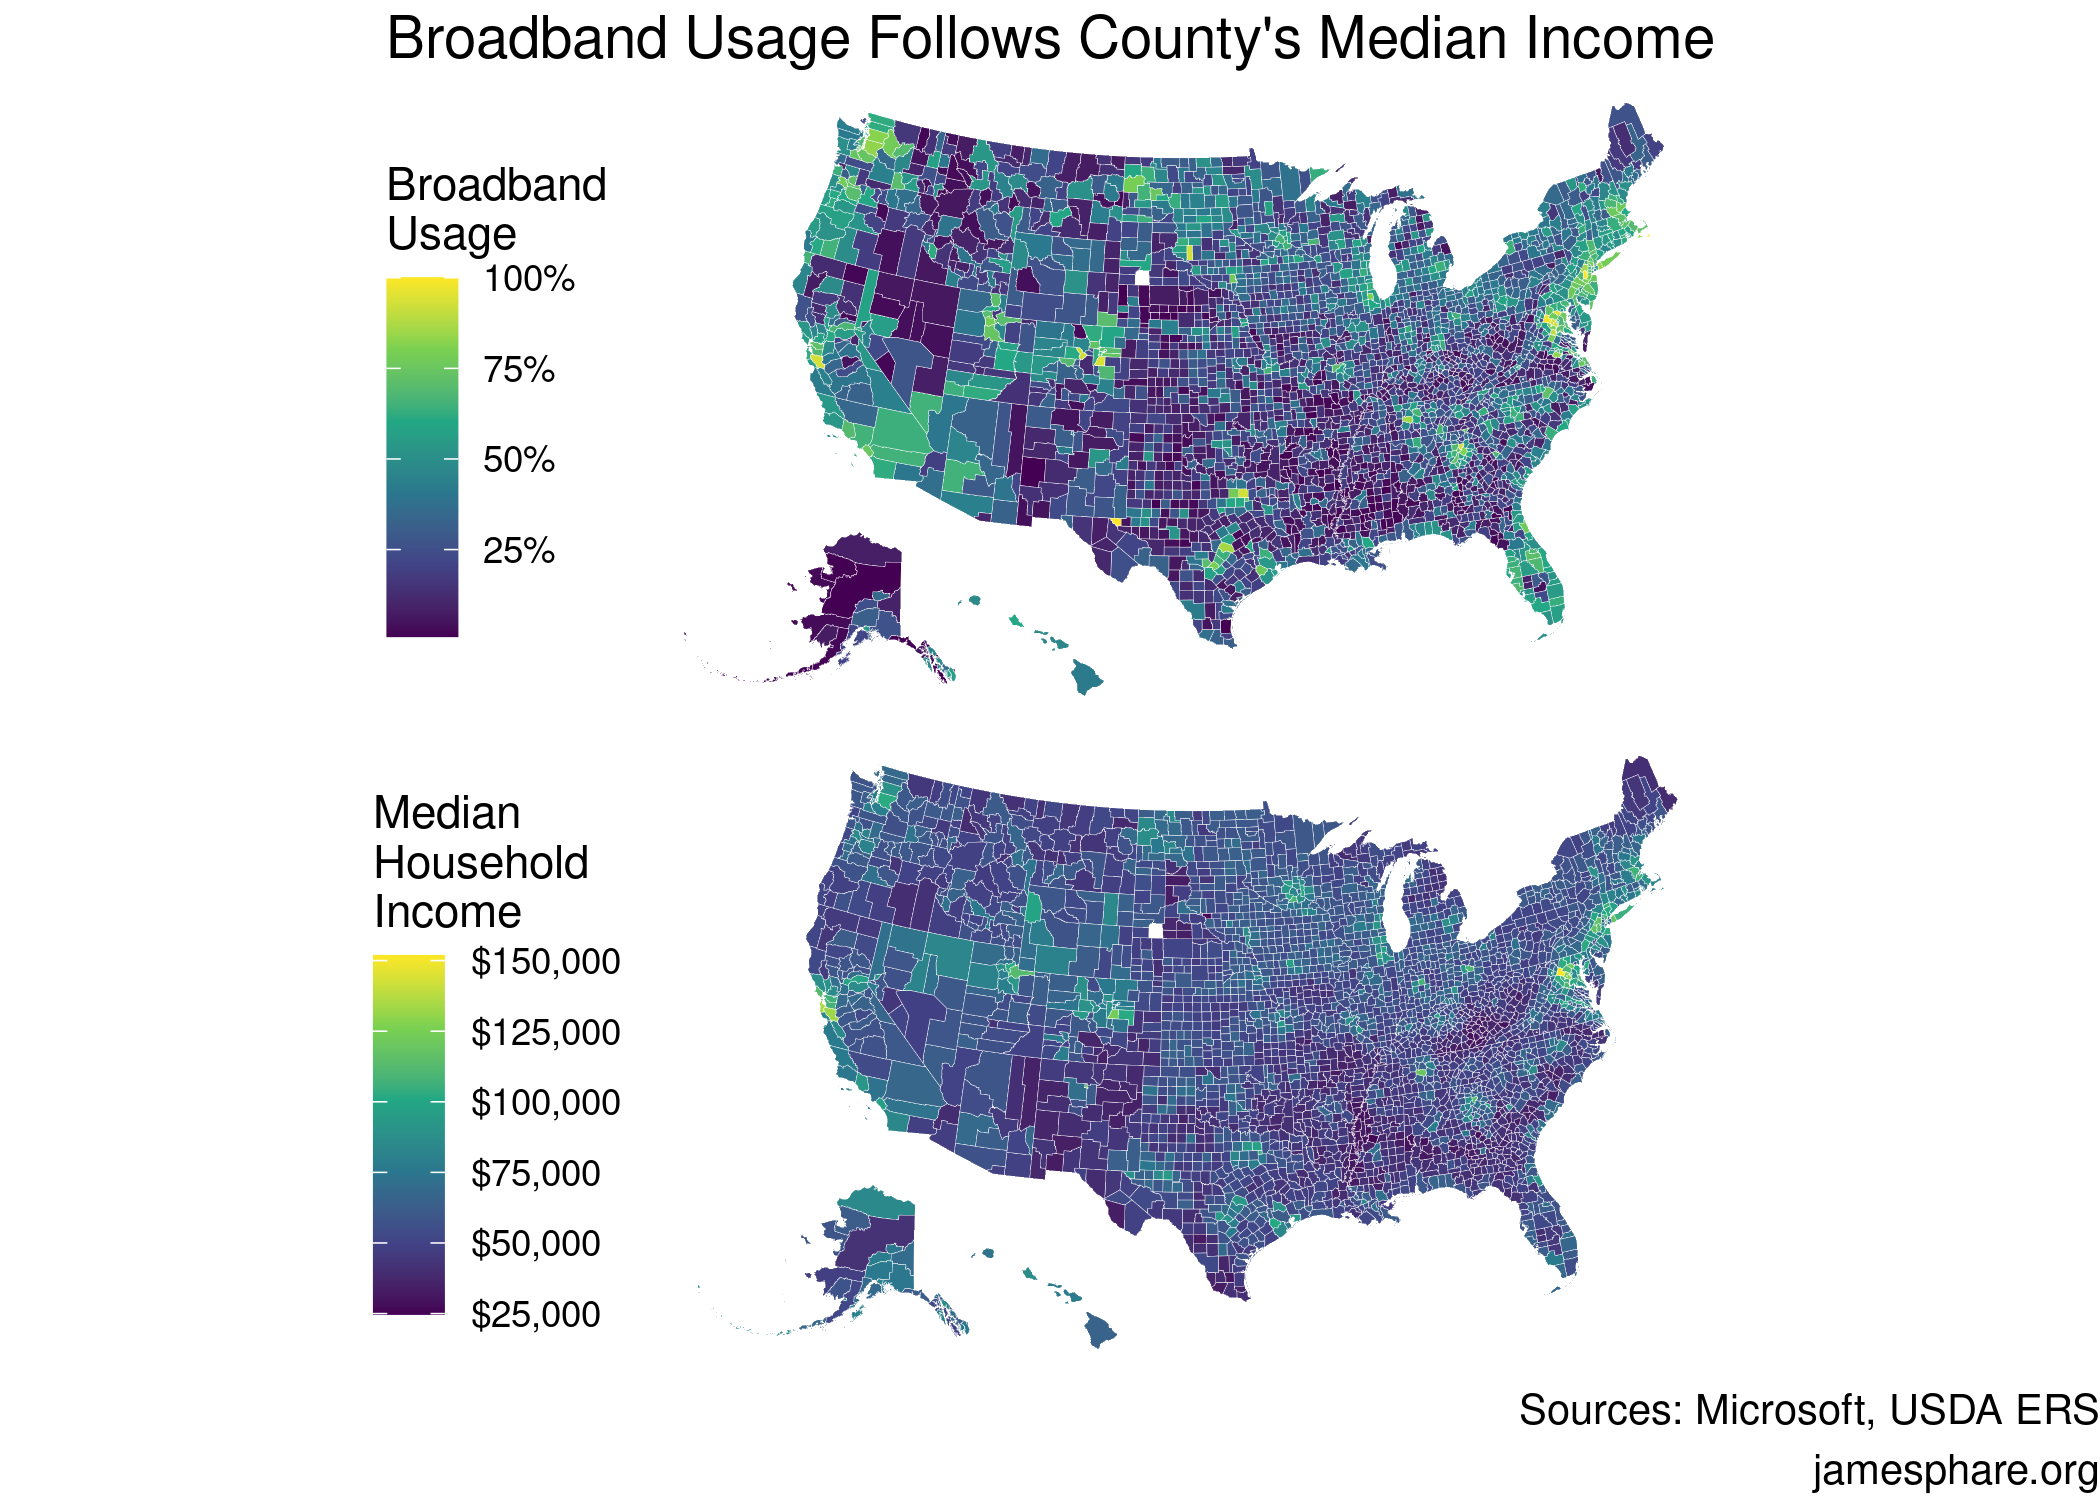 Two choropleths of the United States showing that a county's broadband usage and its median household income are correlated